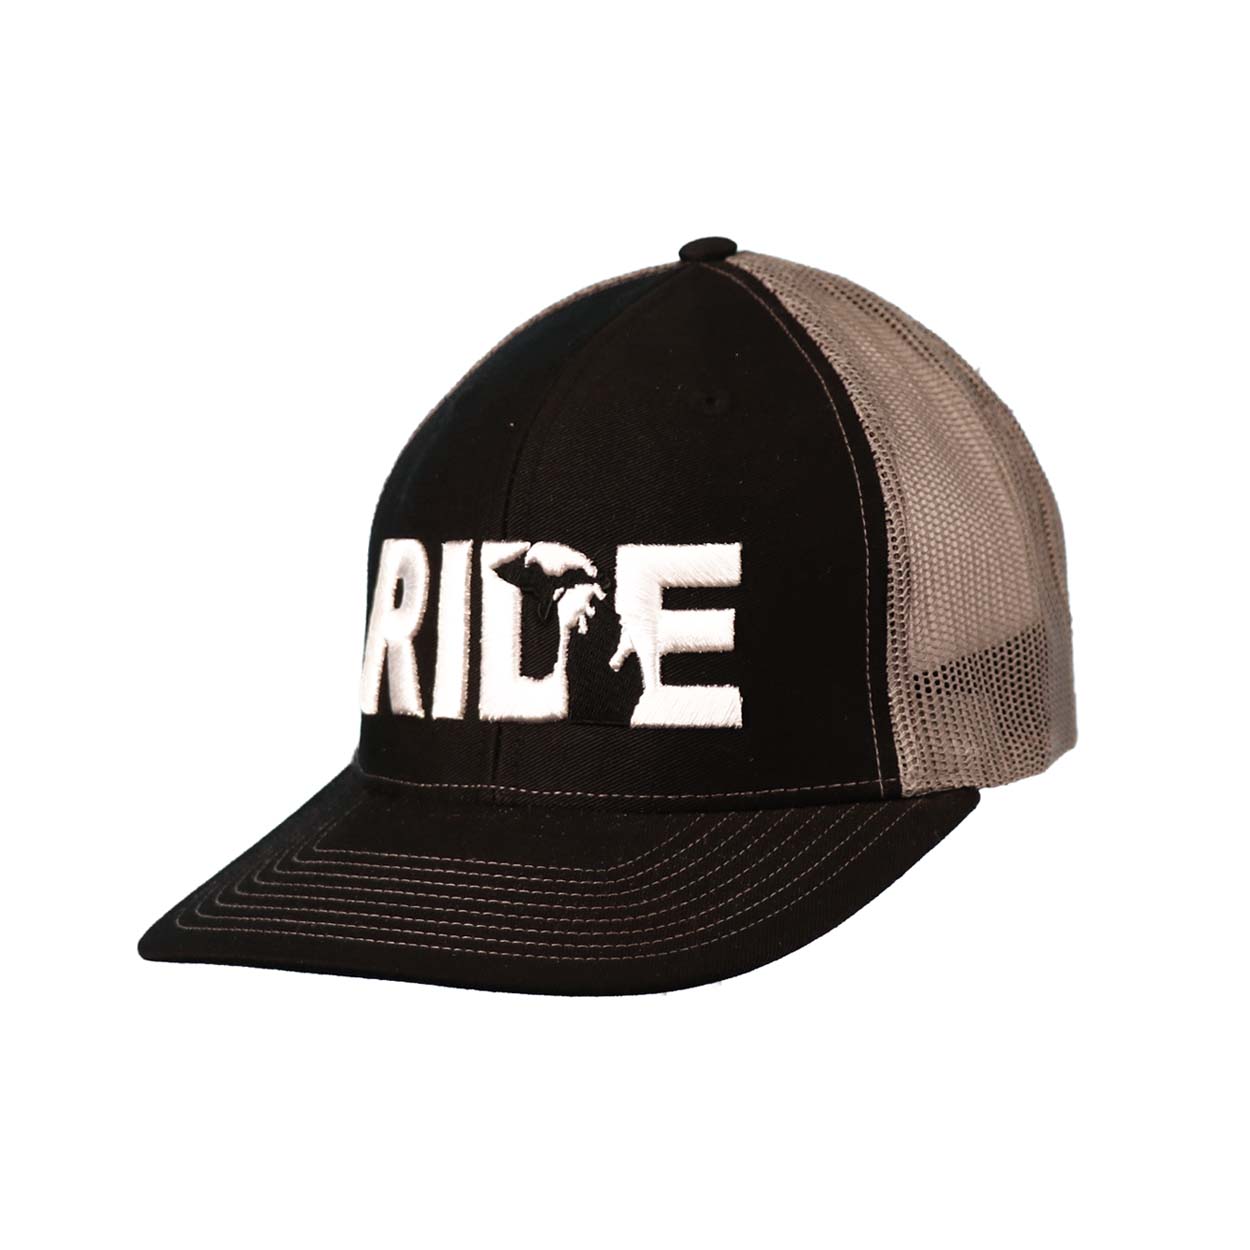 Ride Michigan Classic Embroidered Snapback Trucker Hat Black/Charcoal